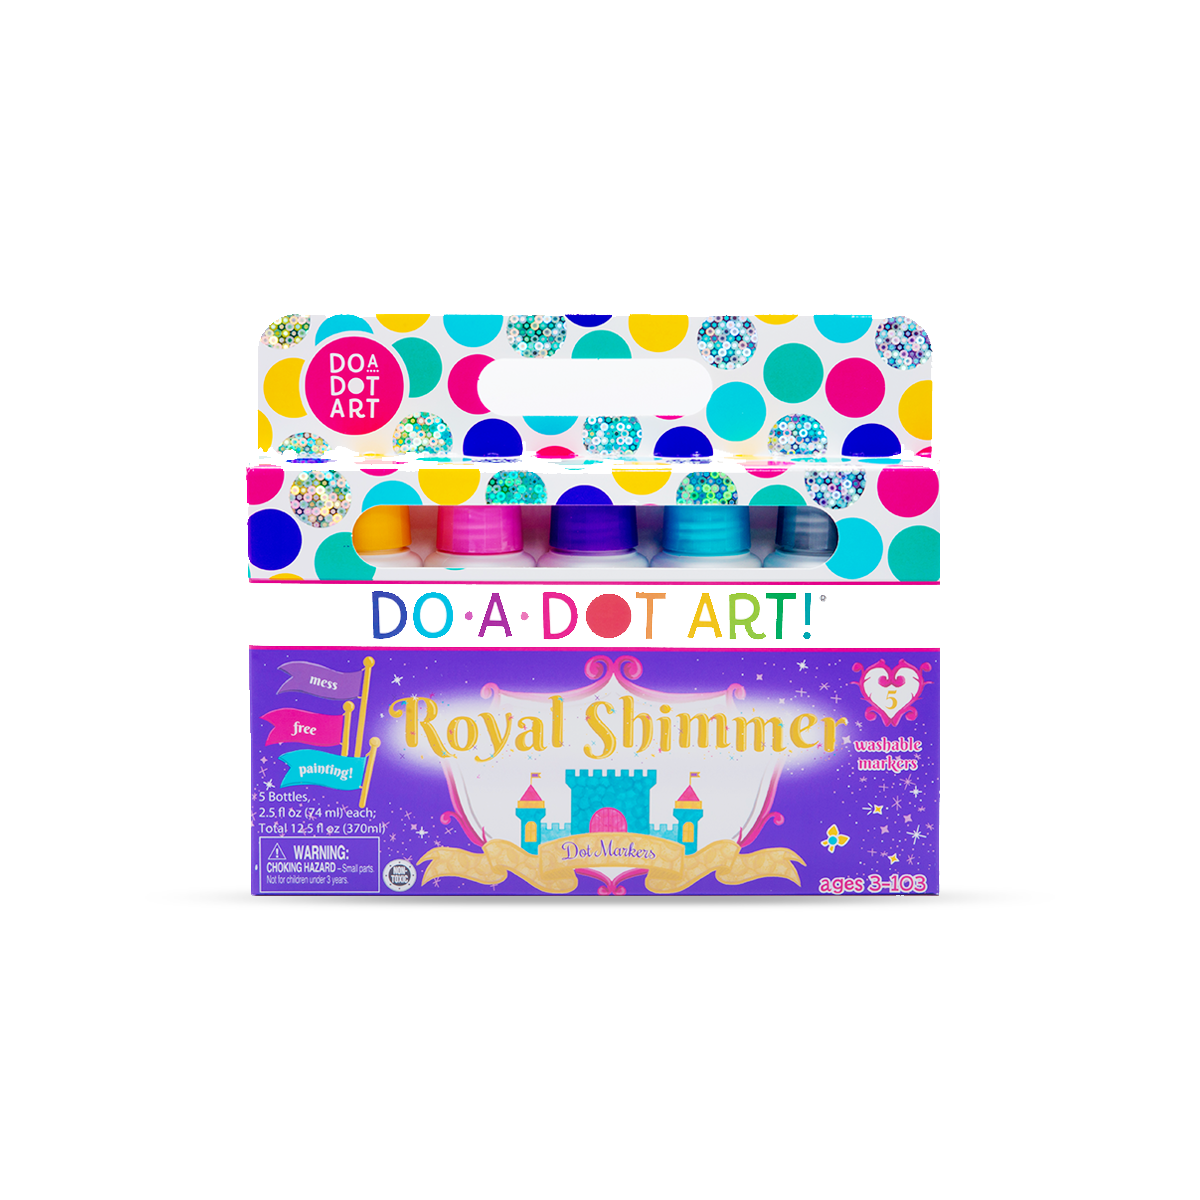 Do-A-Dot Art! Royal Shimmers Dot Markers / 5 Pack